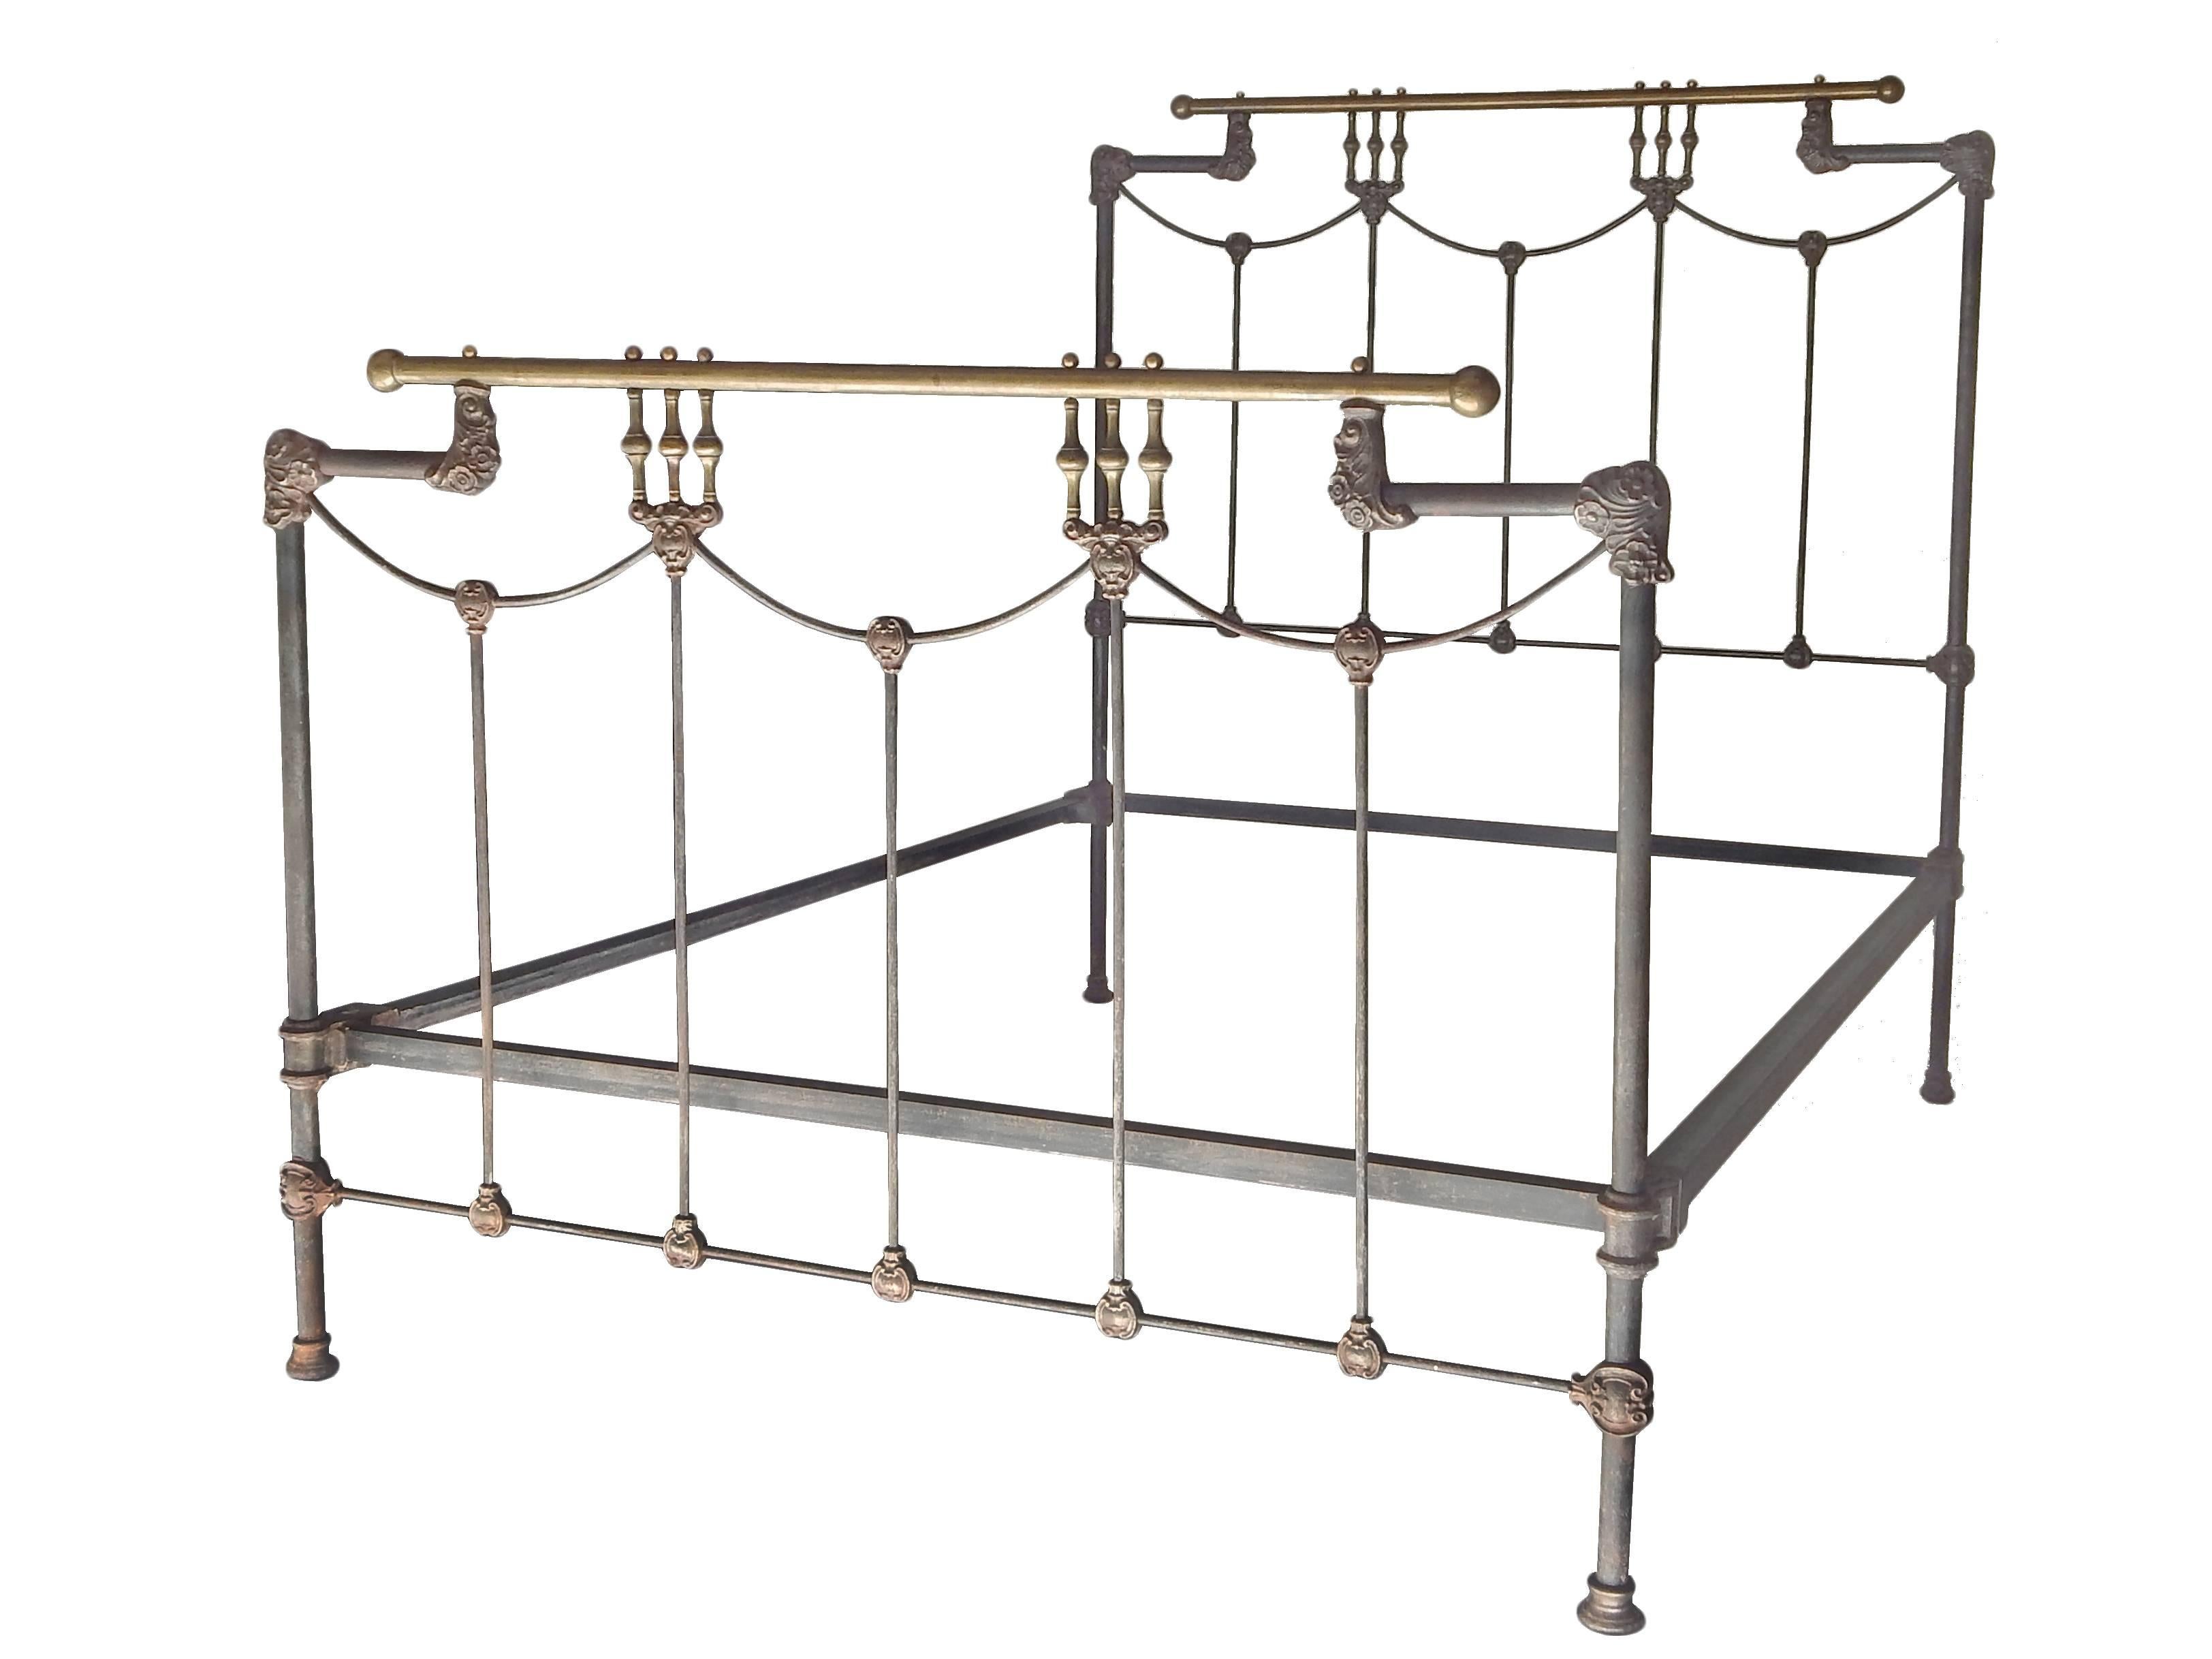 Ornate iron and brass full bed.
Foot board: 41 1/2 high.
Interior 54 x 75 = Full size.